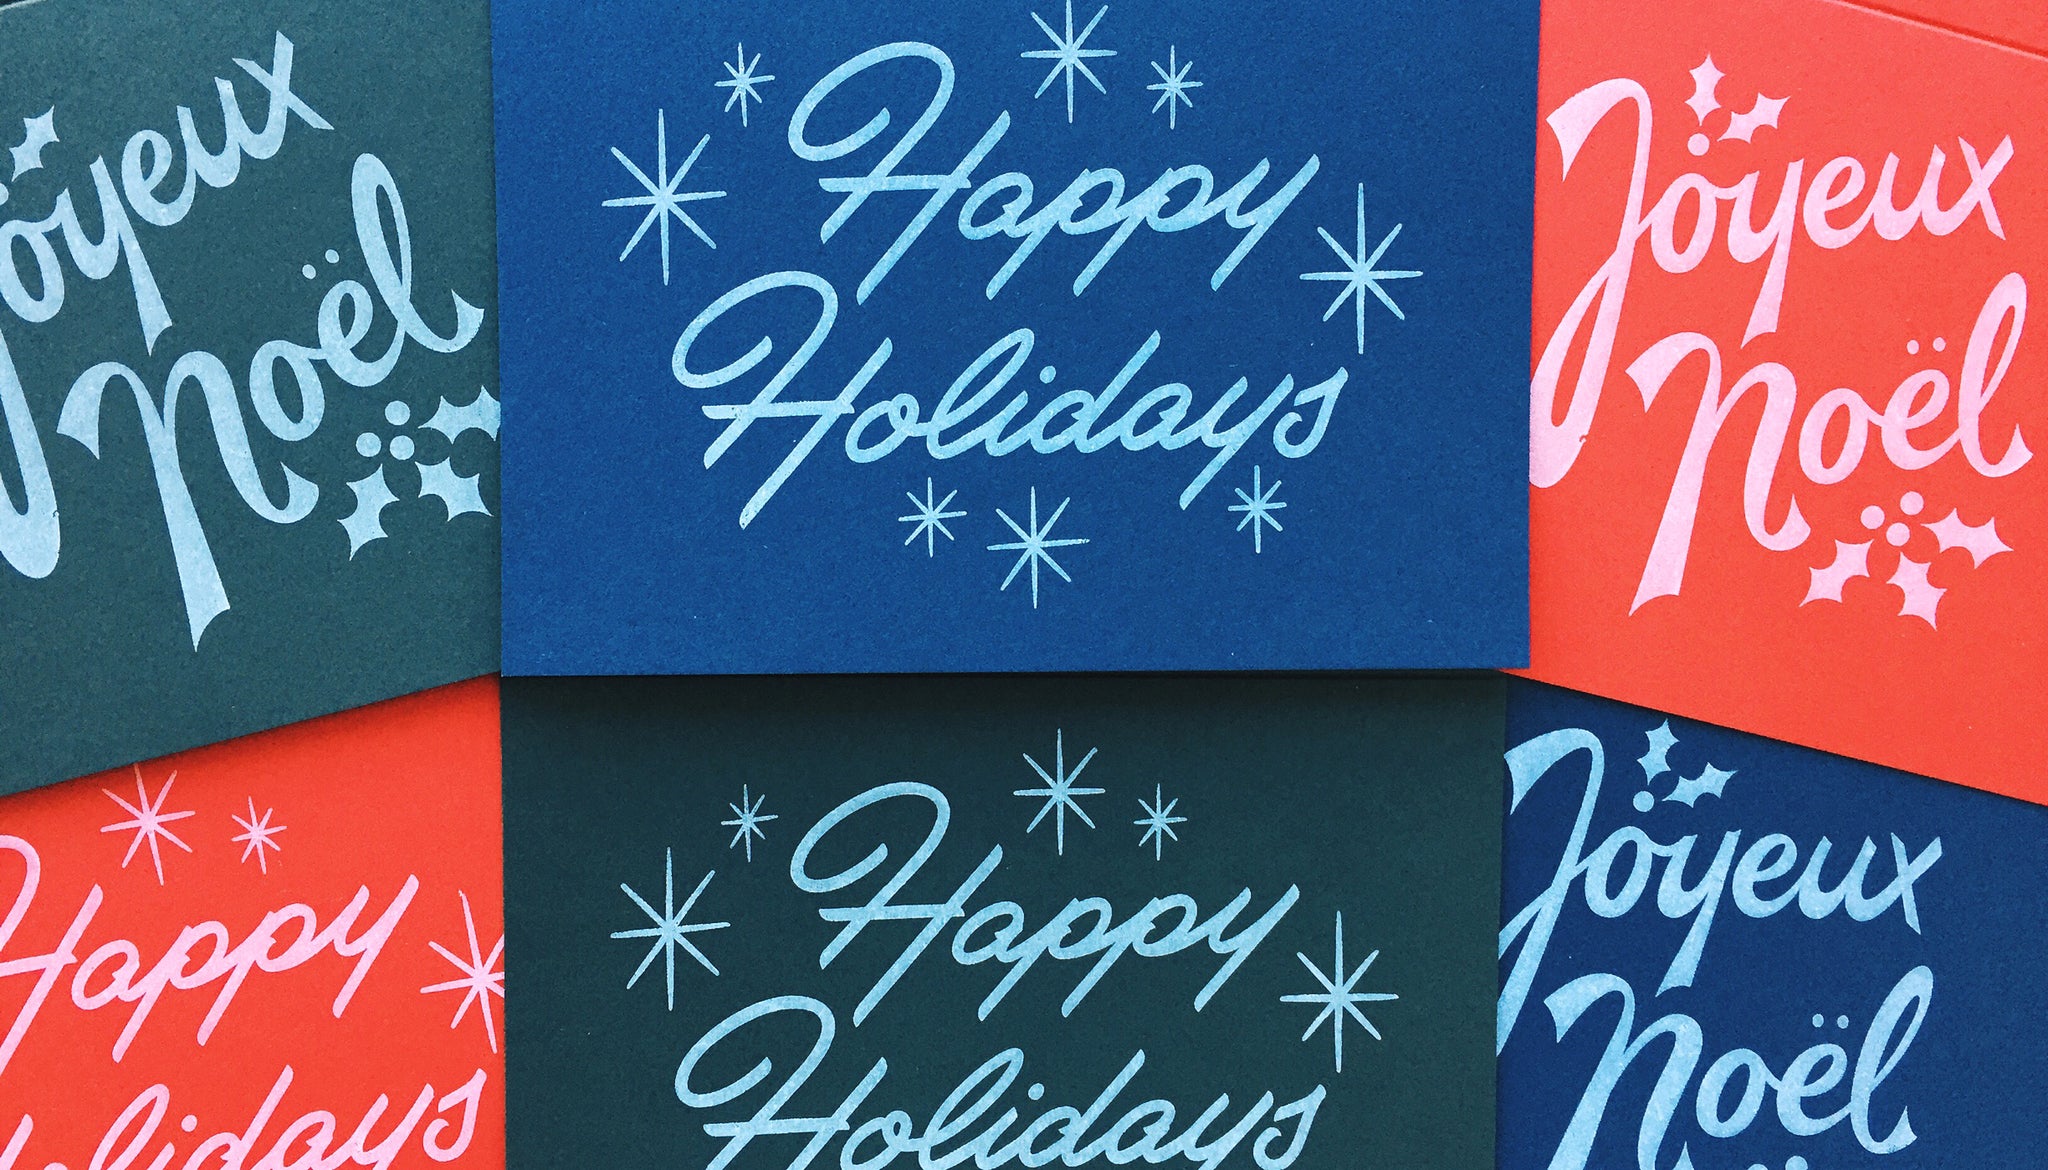 Our holiday cards come on Red, Green and Blue paper from French Paper Co.